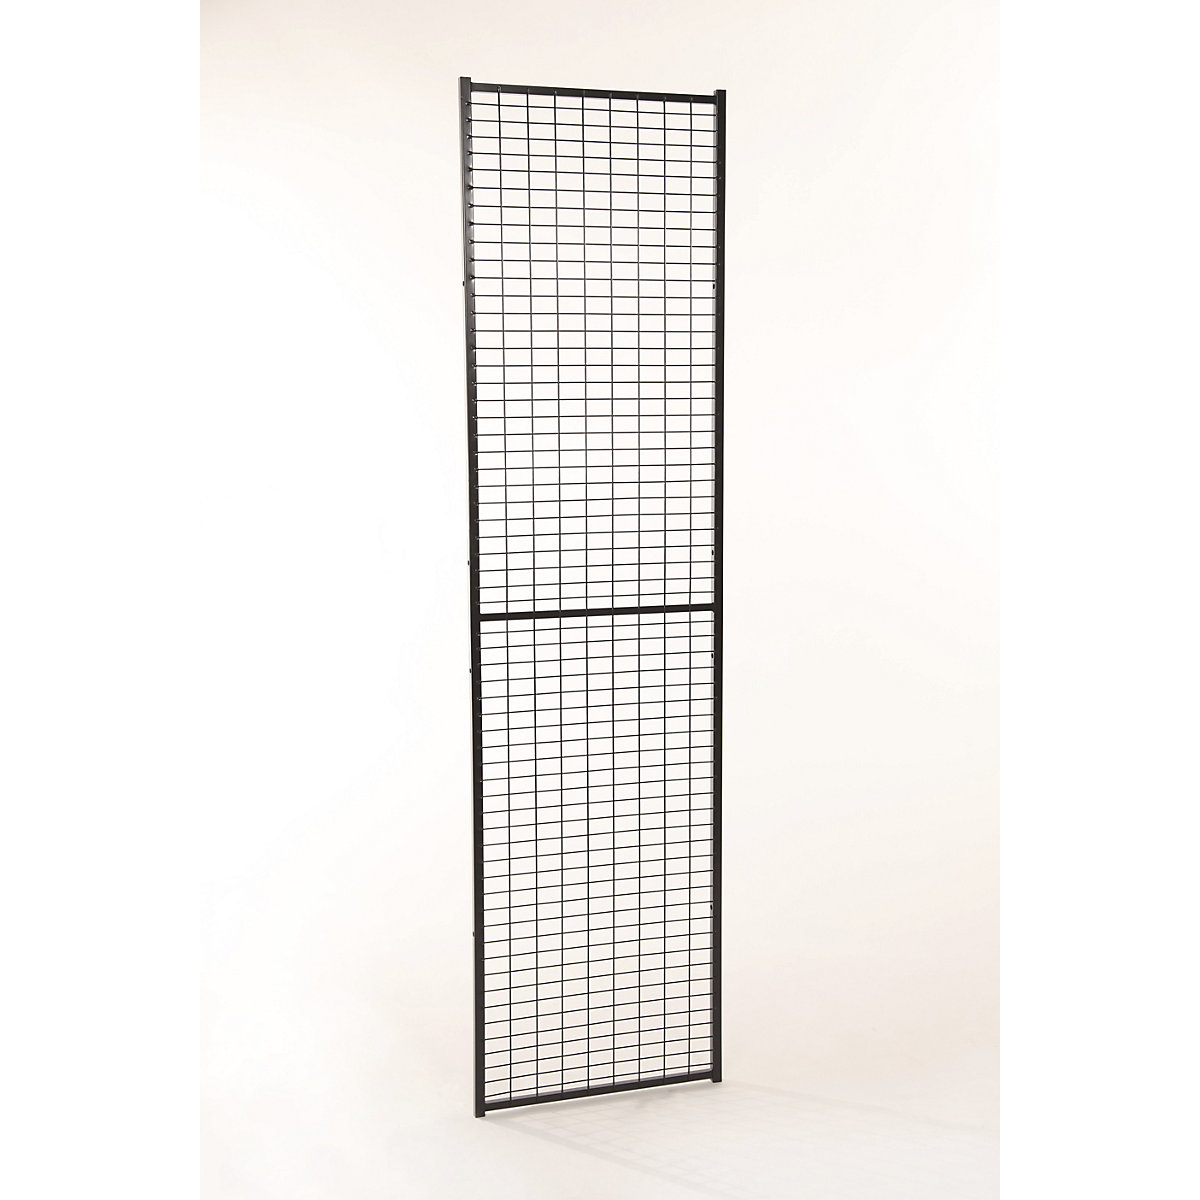 X-GUARD LITE machine protective fencing, wall section – Axelent